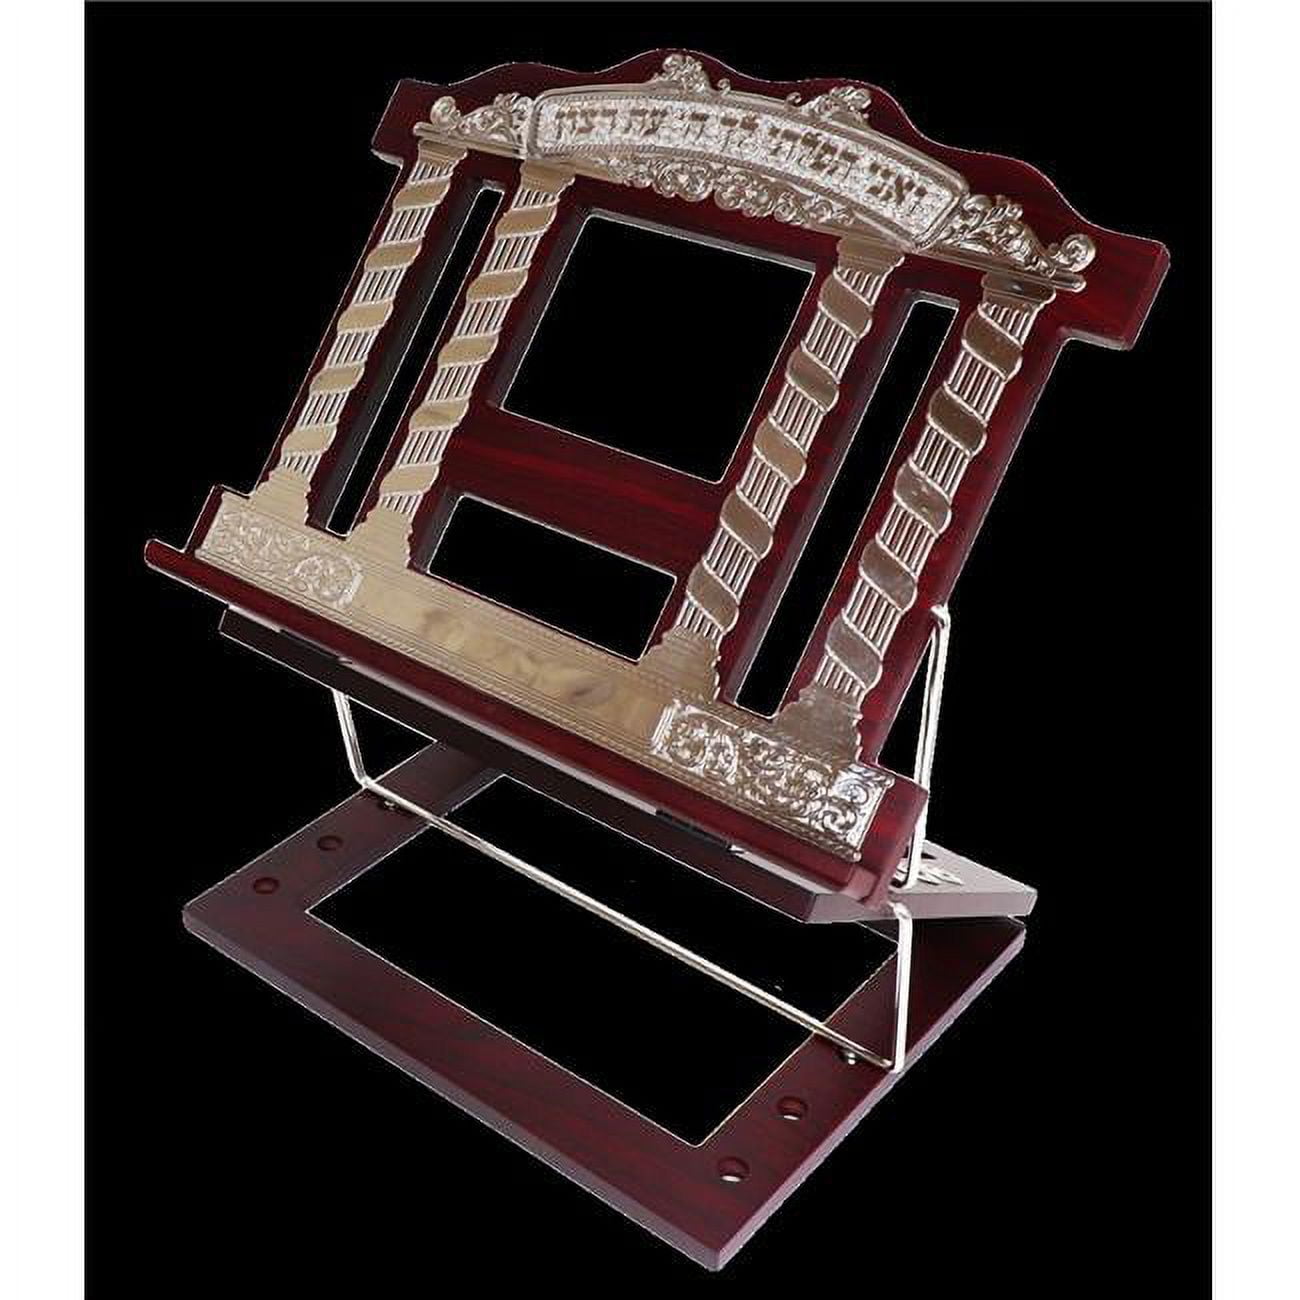 Picture of Nua 58367-2 15 x 12 in. Wooden 2 Tone Book Stand & Shtender 2 Position with Clock Silver Plate